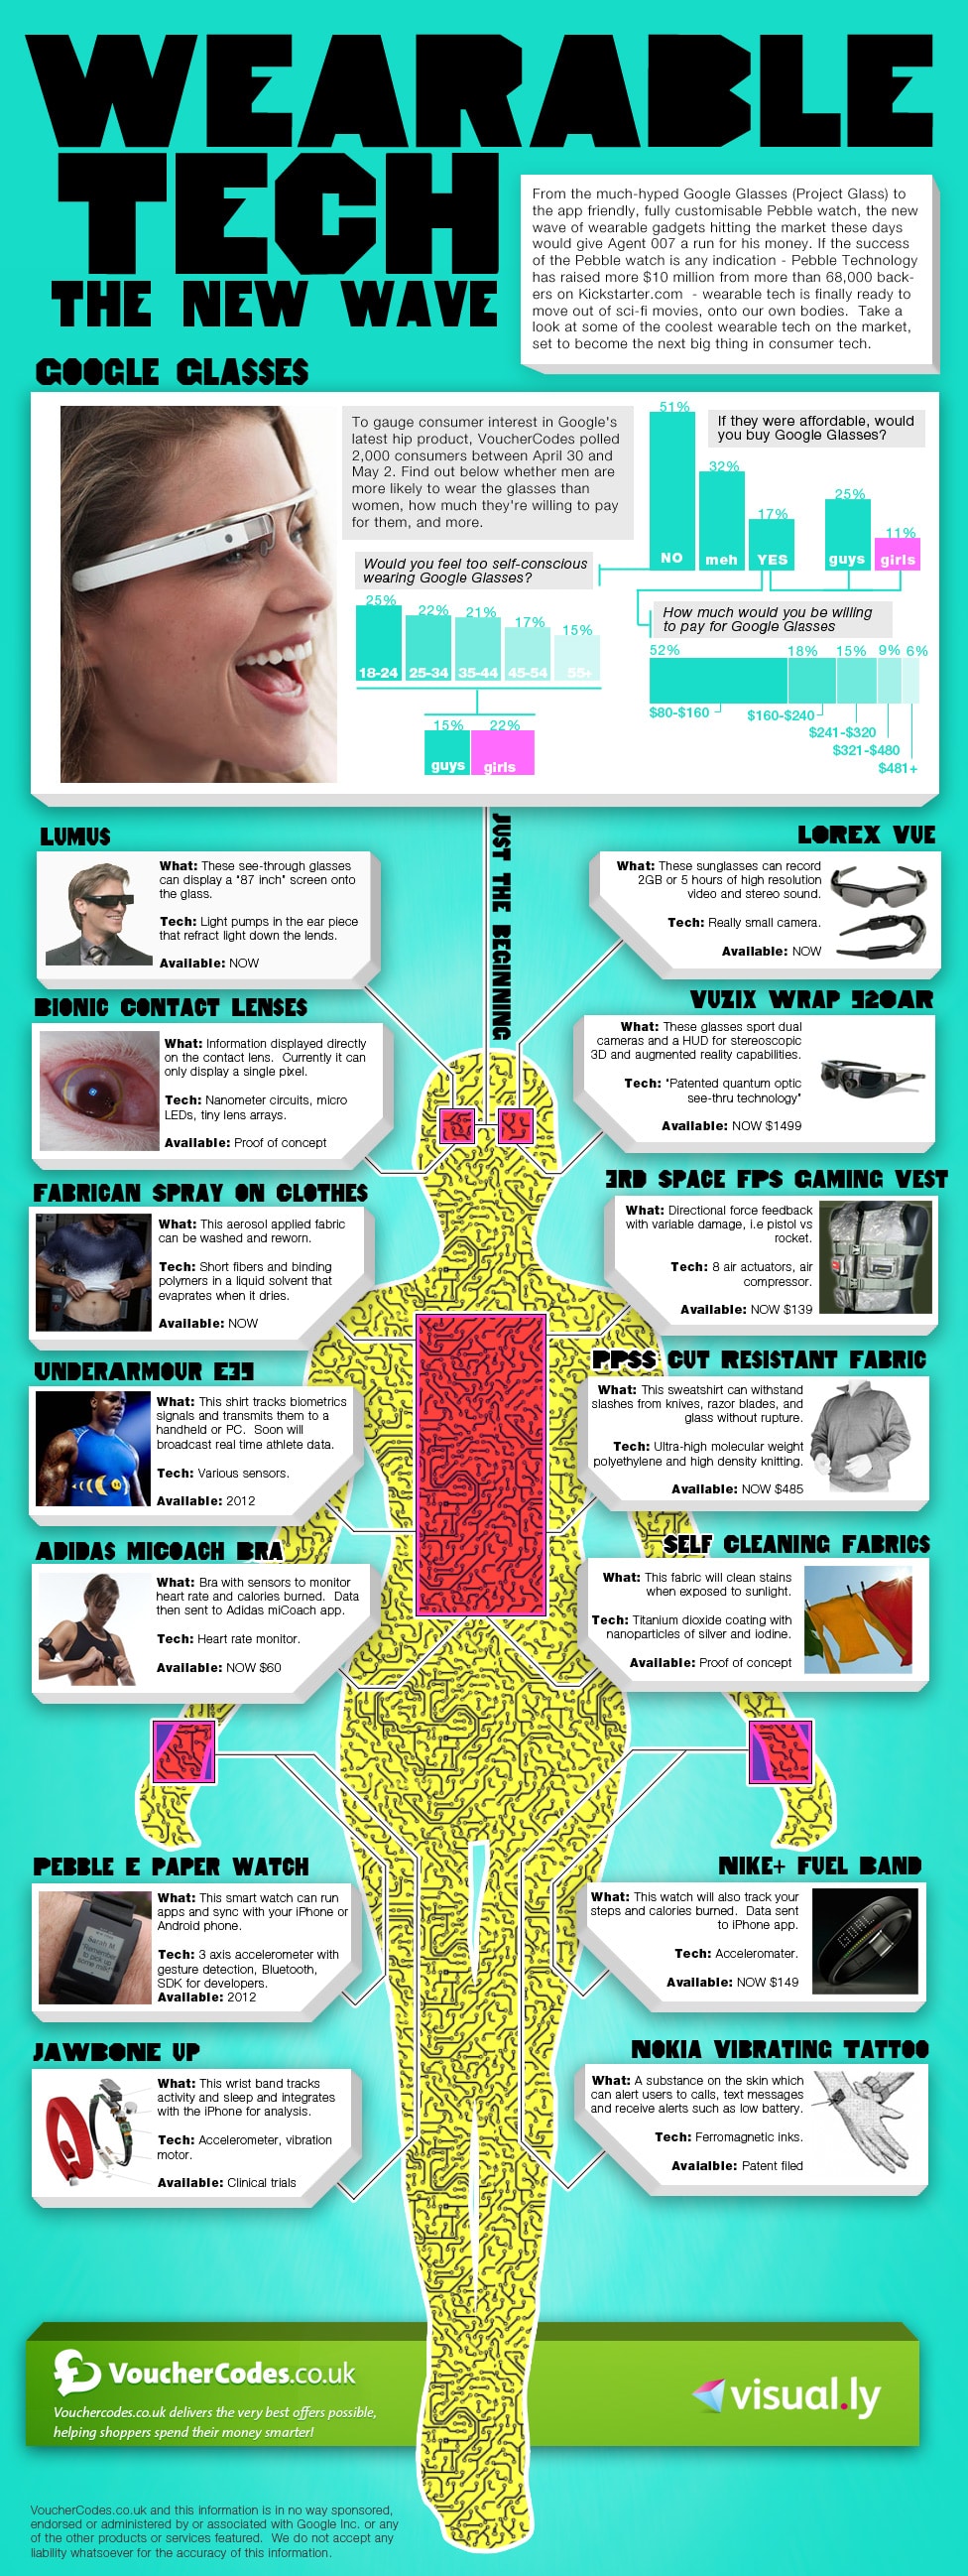 Is Wearable Tech The New Trend In 2013? [Infographic]